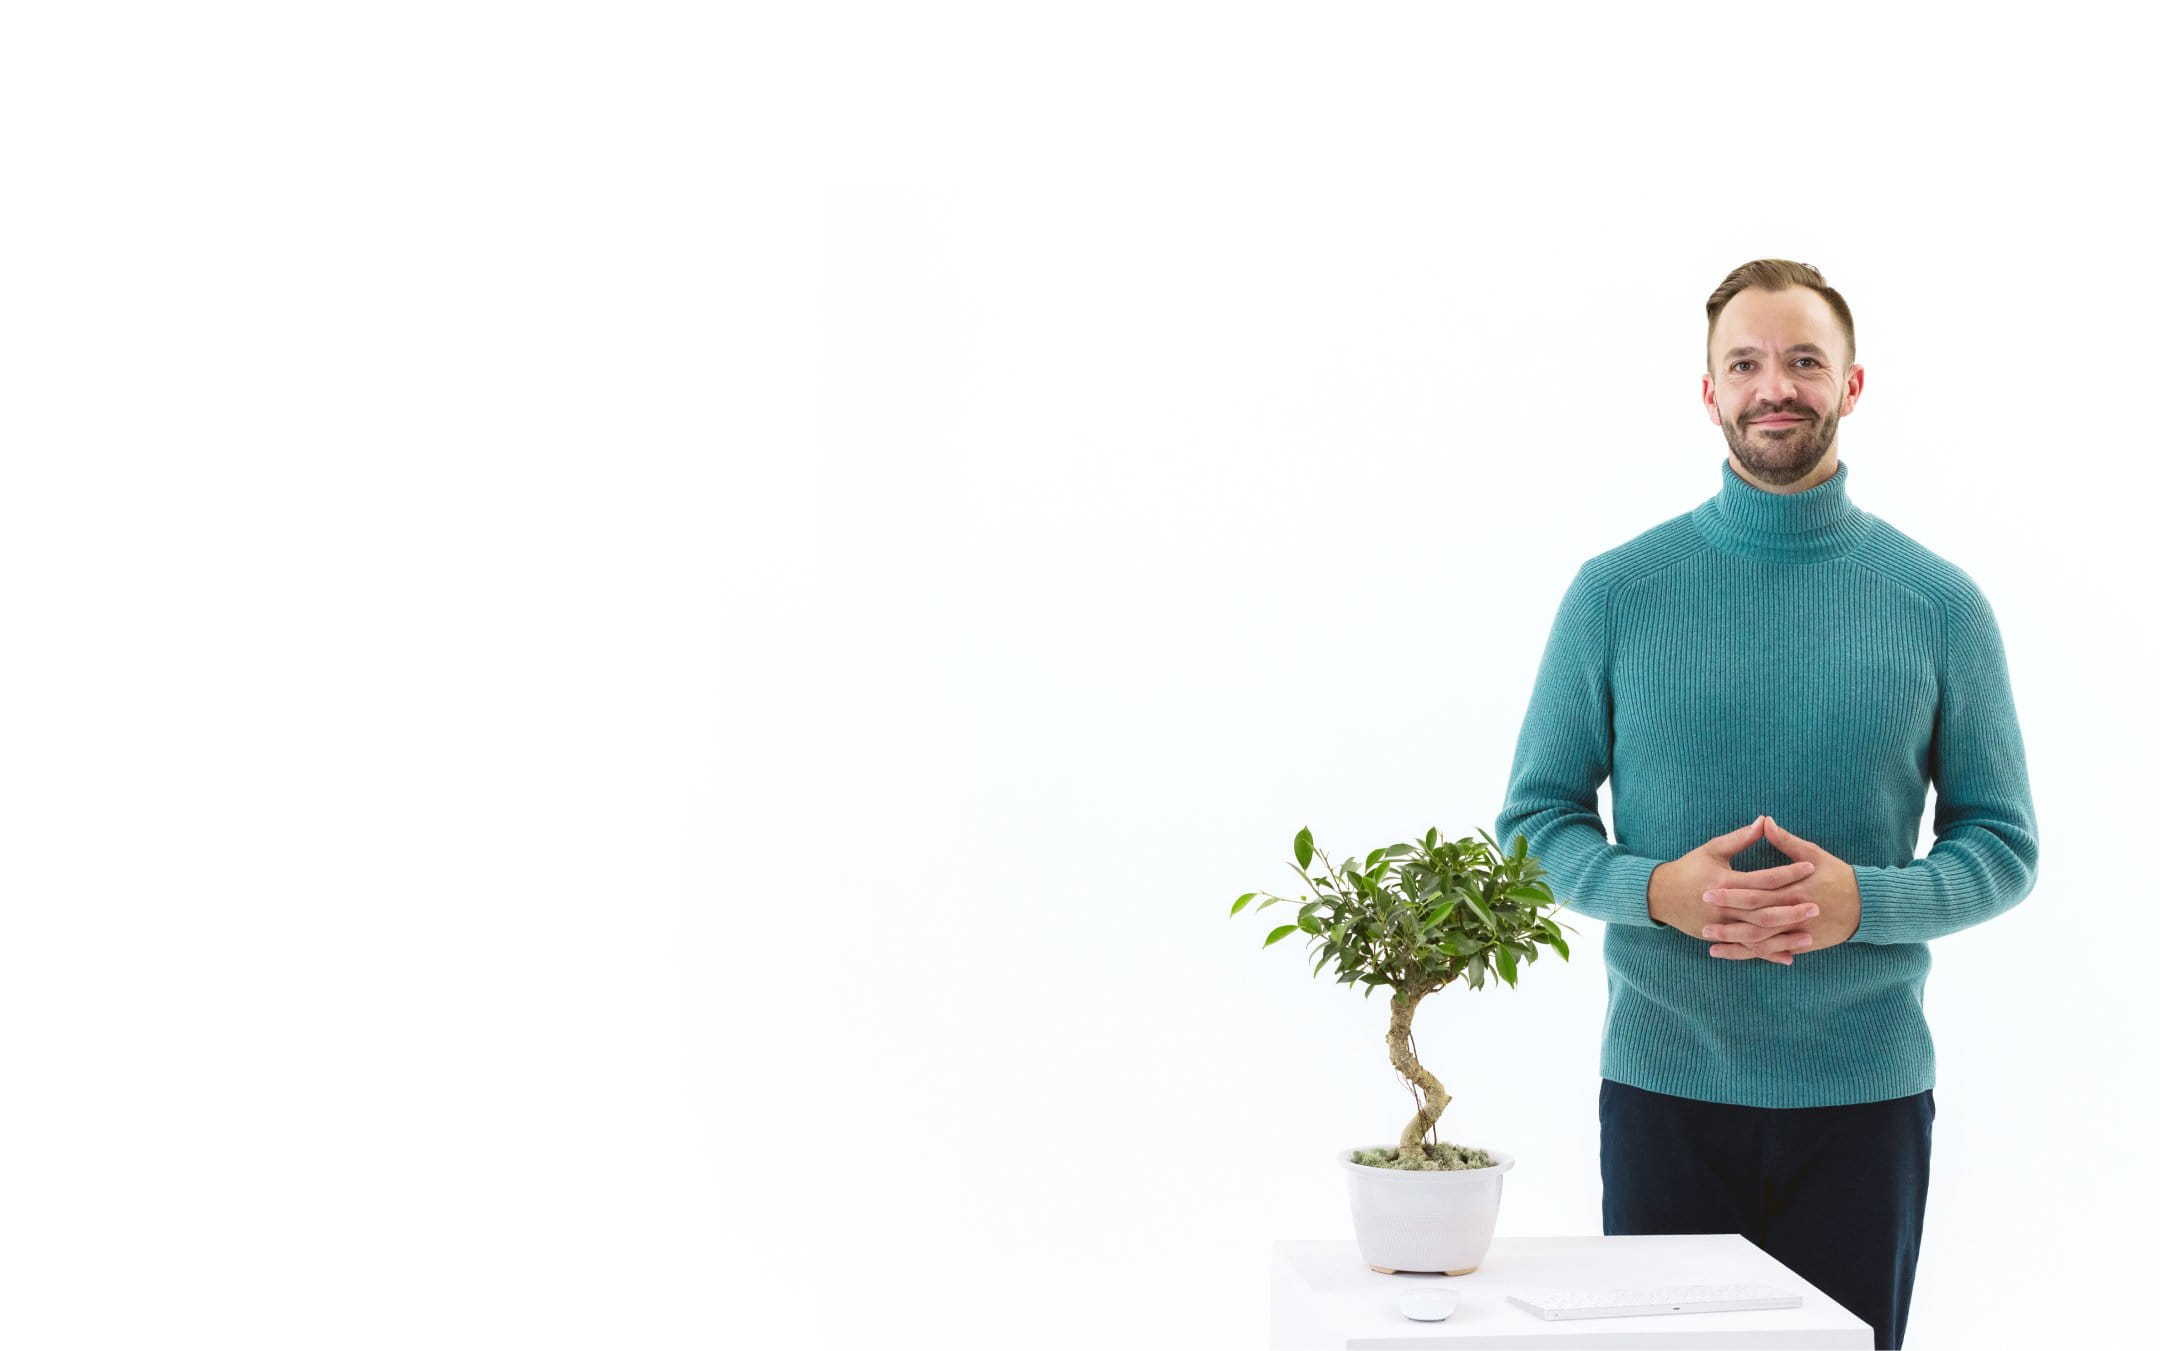 WP Engine representative looking calm with hands clasped and a bonsai tree in foreground